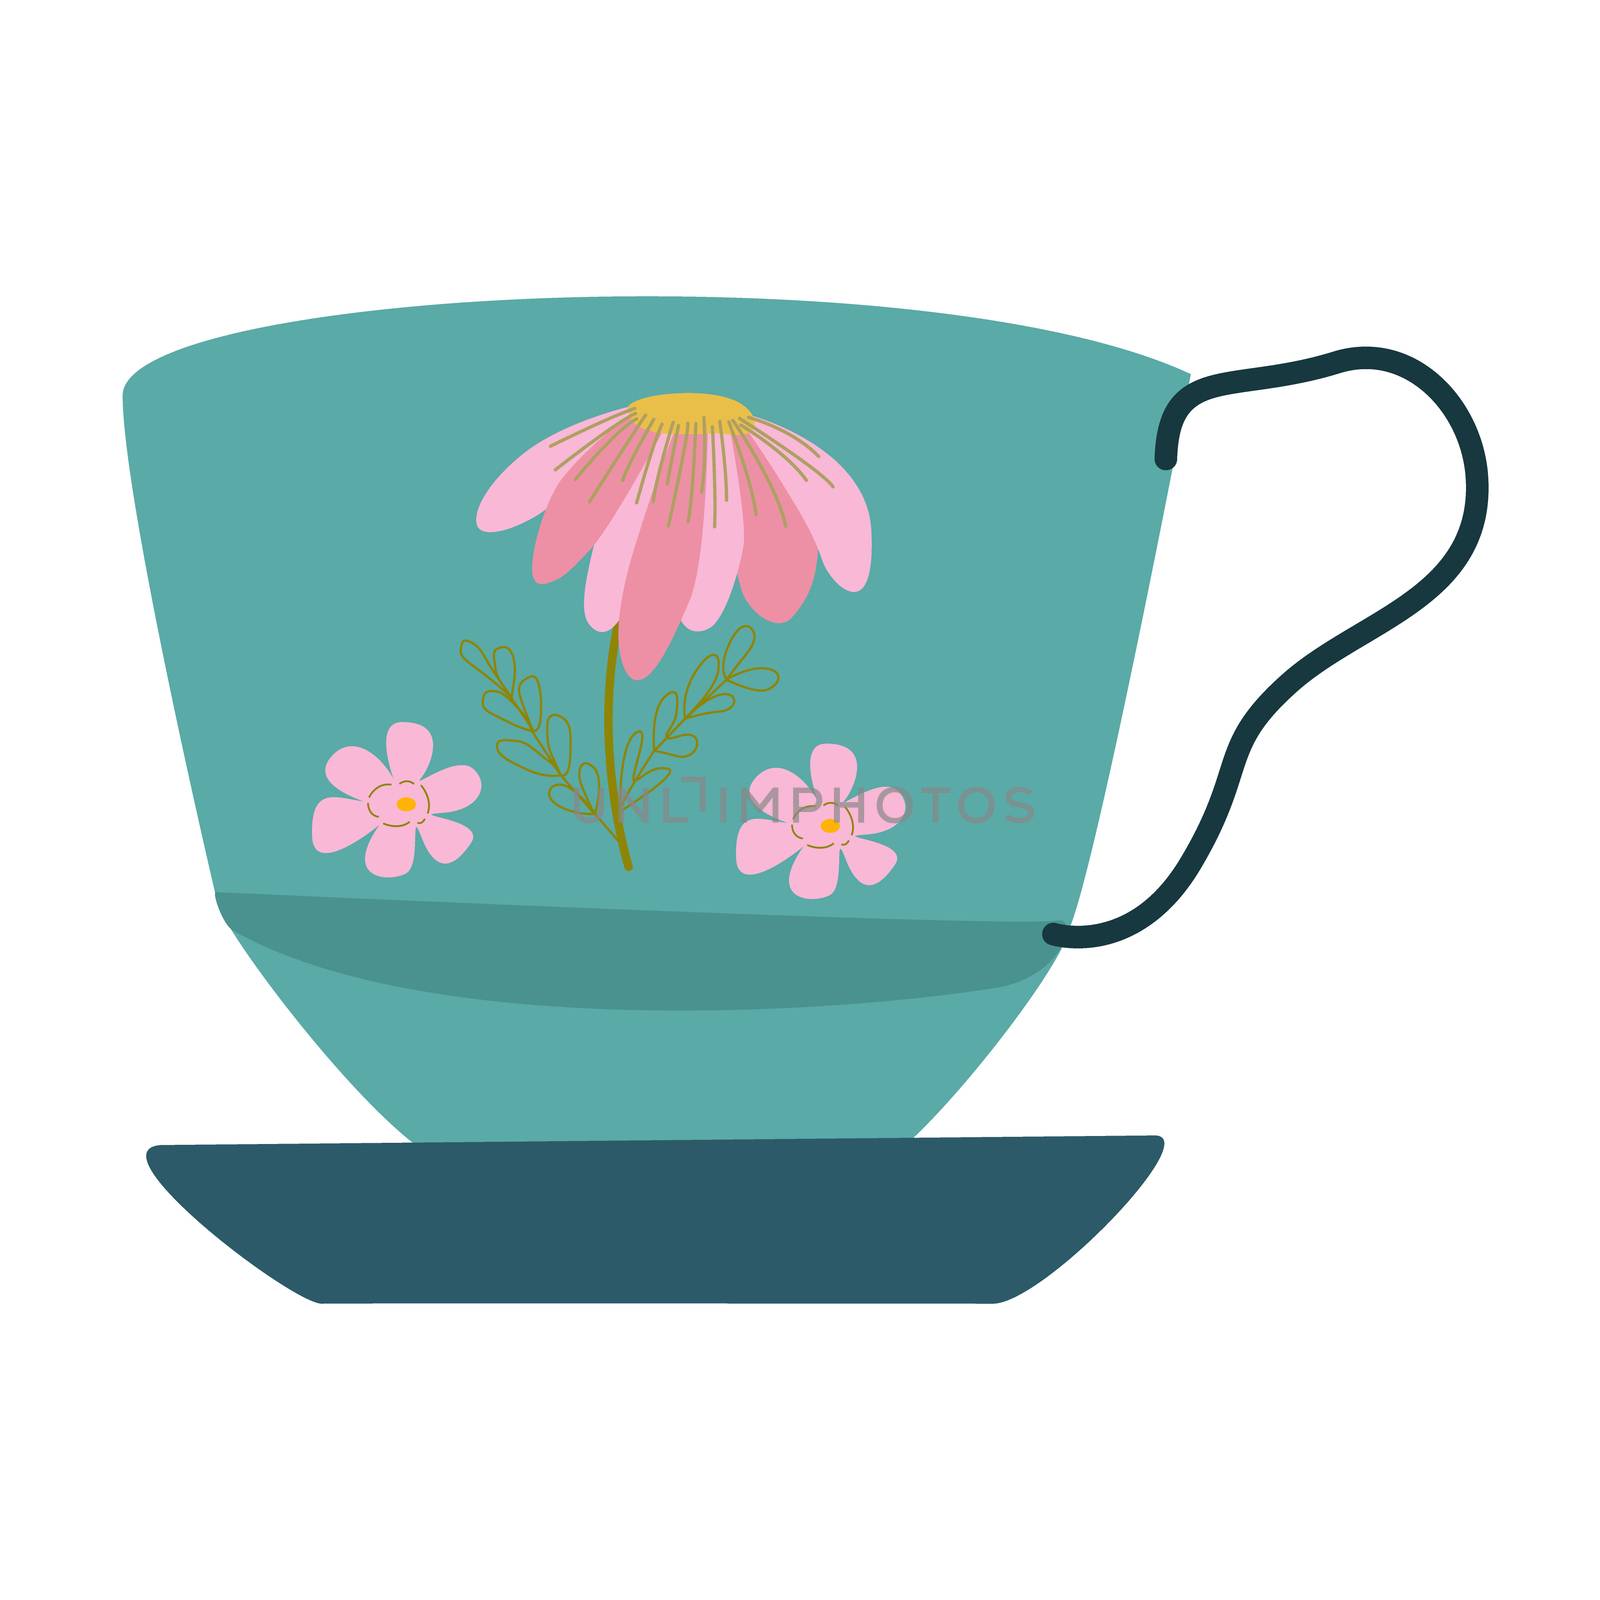 Retro turquoise tea cup with pink daisy decor. Isolated on white background. Flat cartoon style. Vector Illustration.